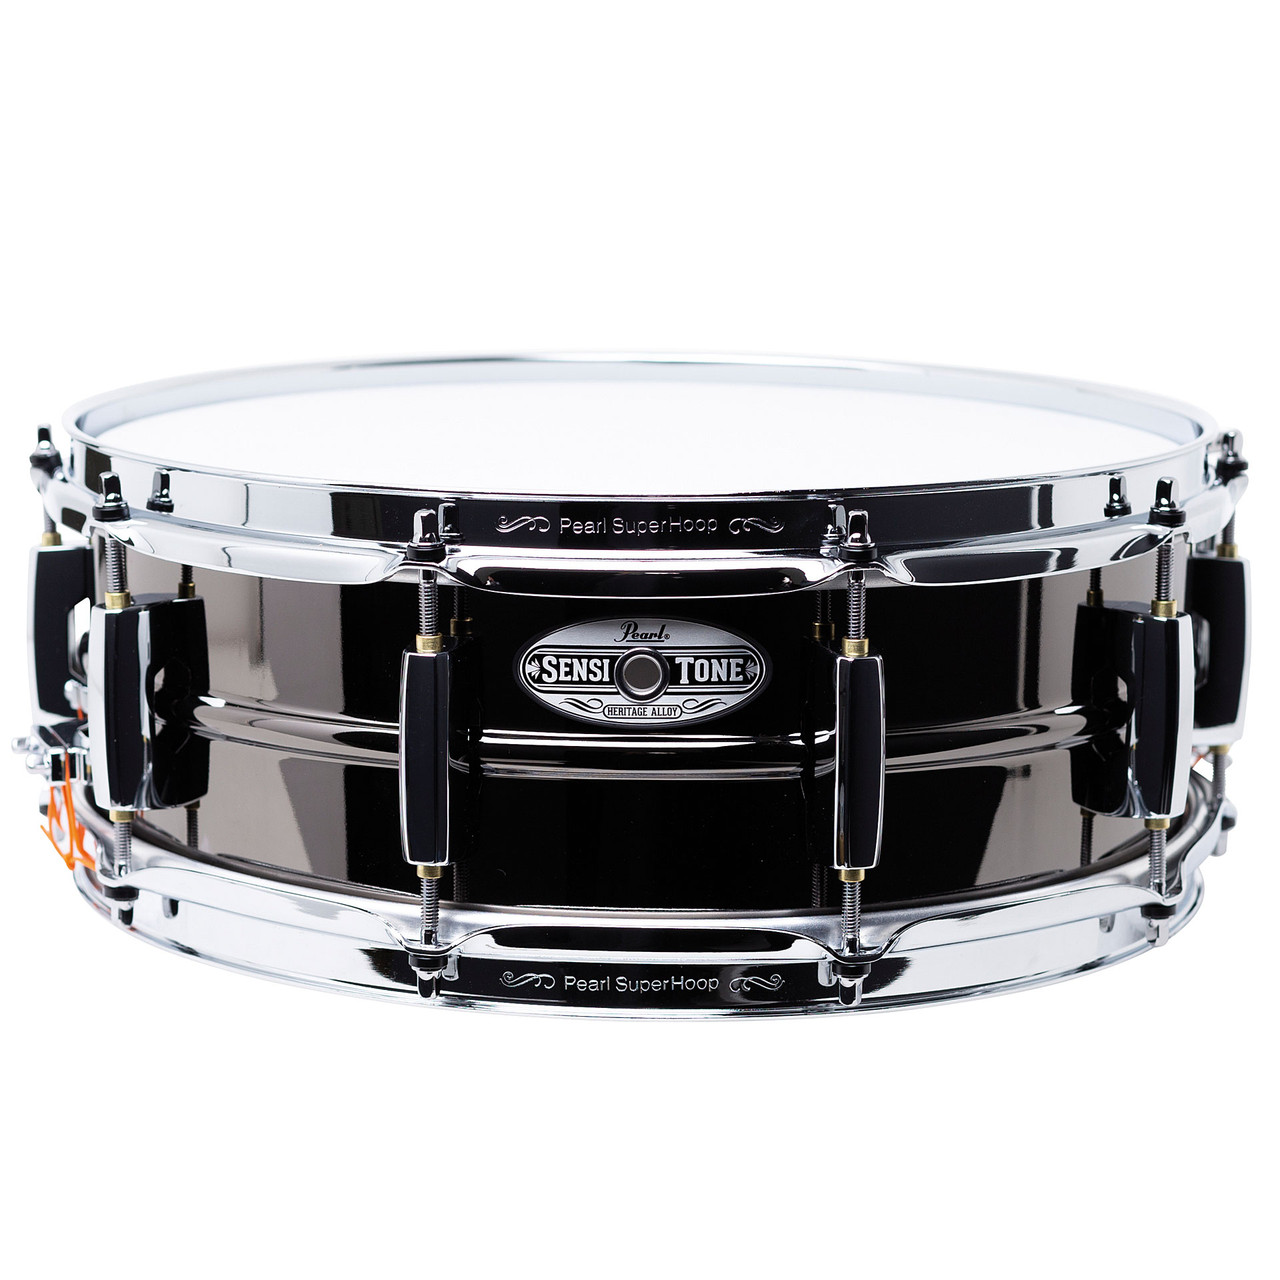 https://cdn2.bigcommerce.com/server3500/08e8a/products/5070/images/9440/pearl-sensitone-heritage-alloy-sth1450br-black-nickel-over-brass-14-x-5-snare-drum__15324.1669957031.1280.1280.jpg?c=2